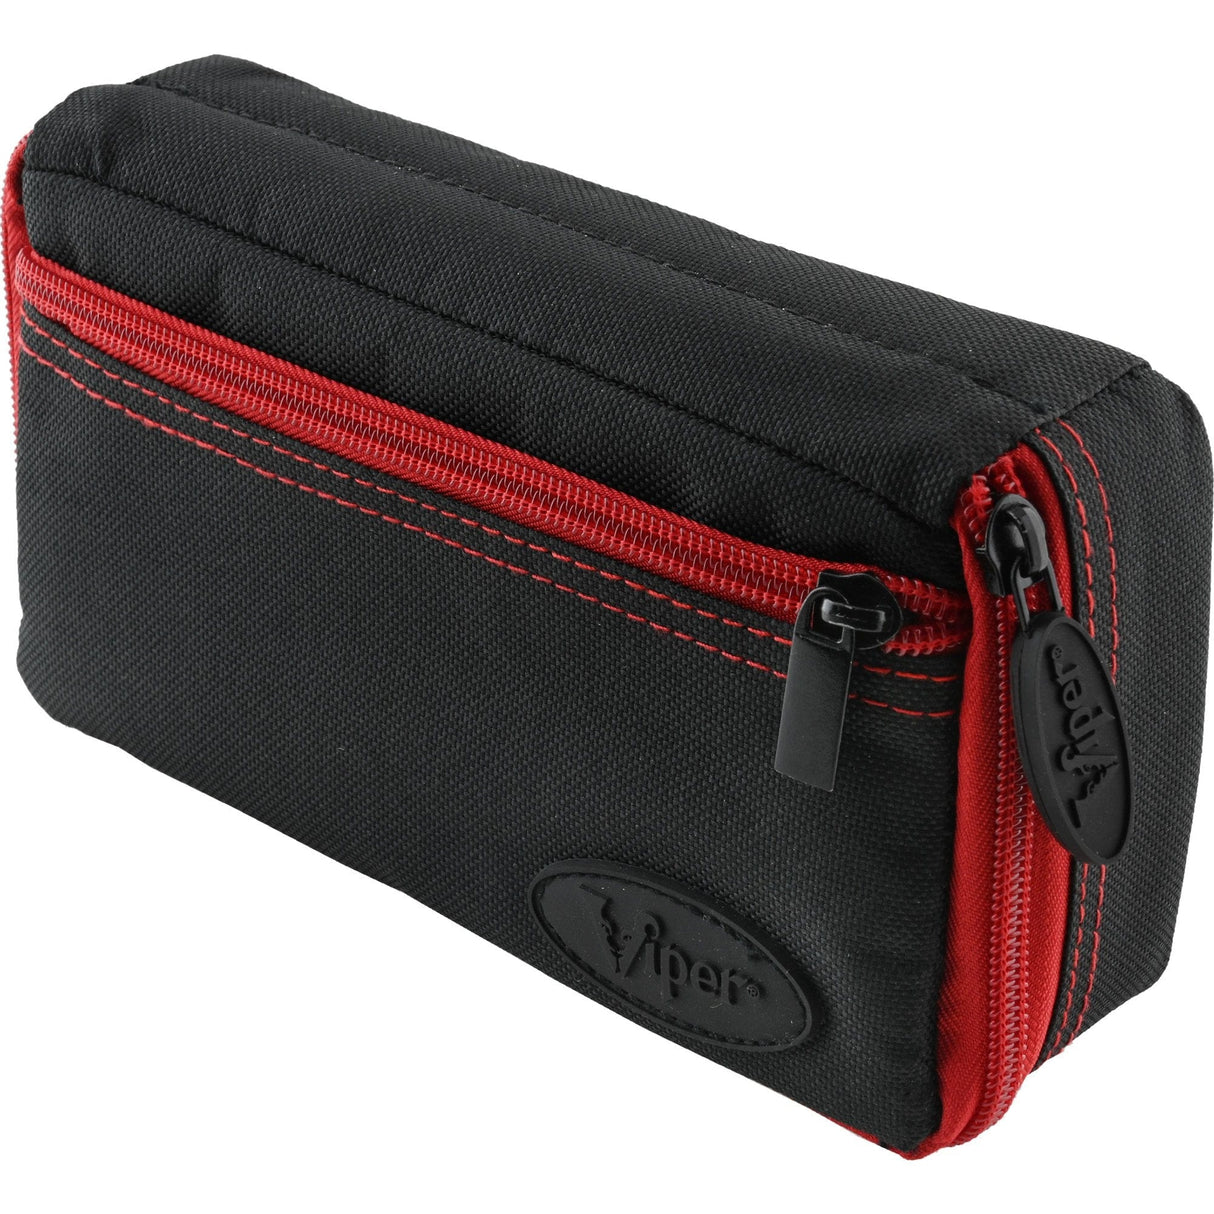 Viper Plazma Dart Case - Extremely Tough & Durable Red